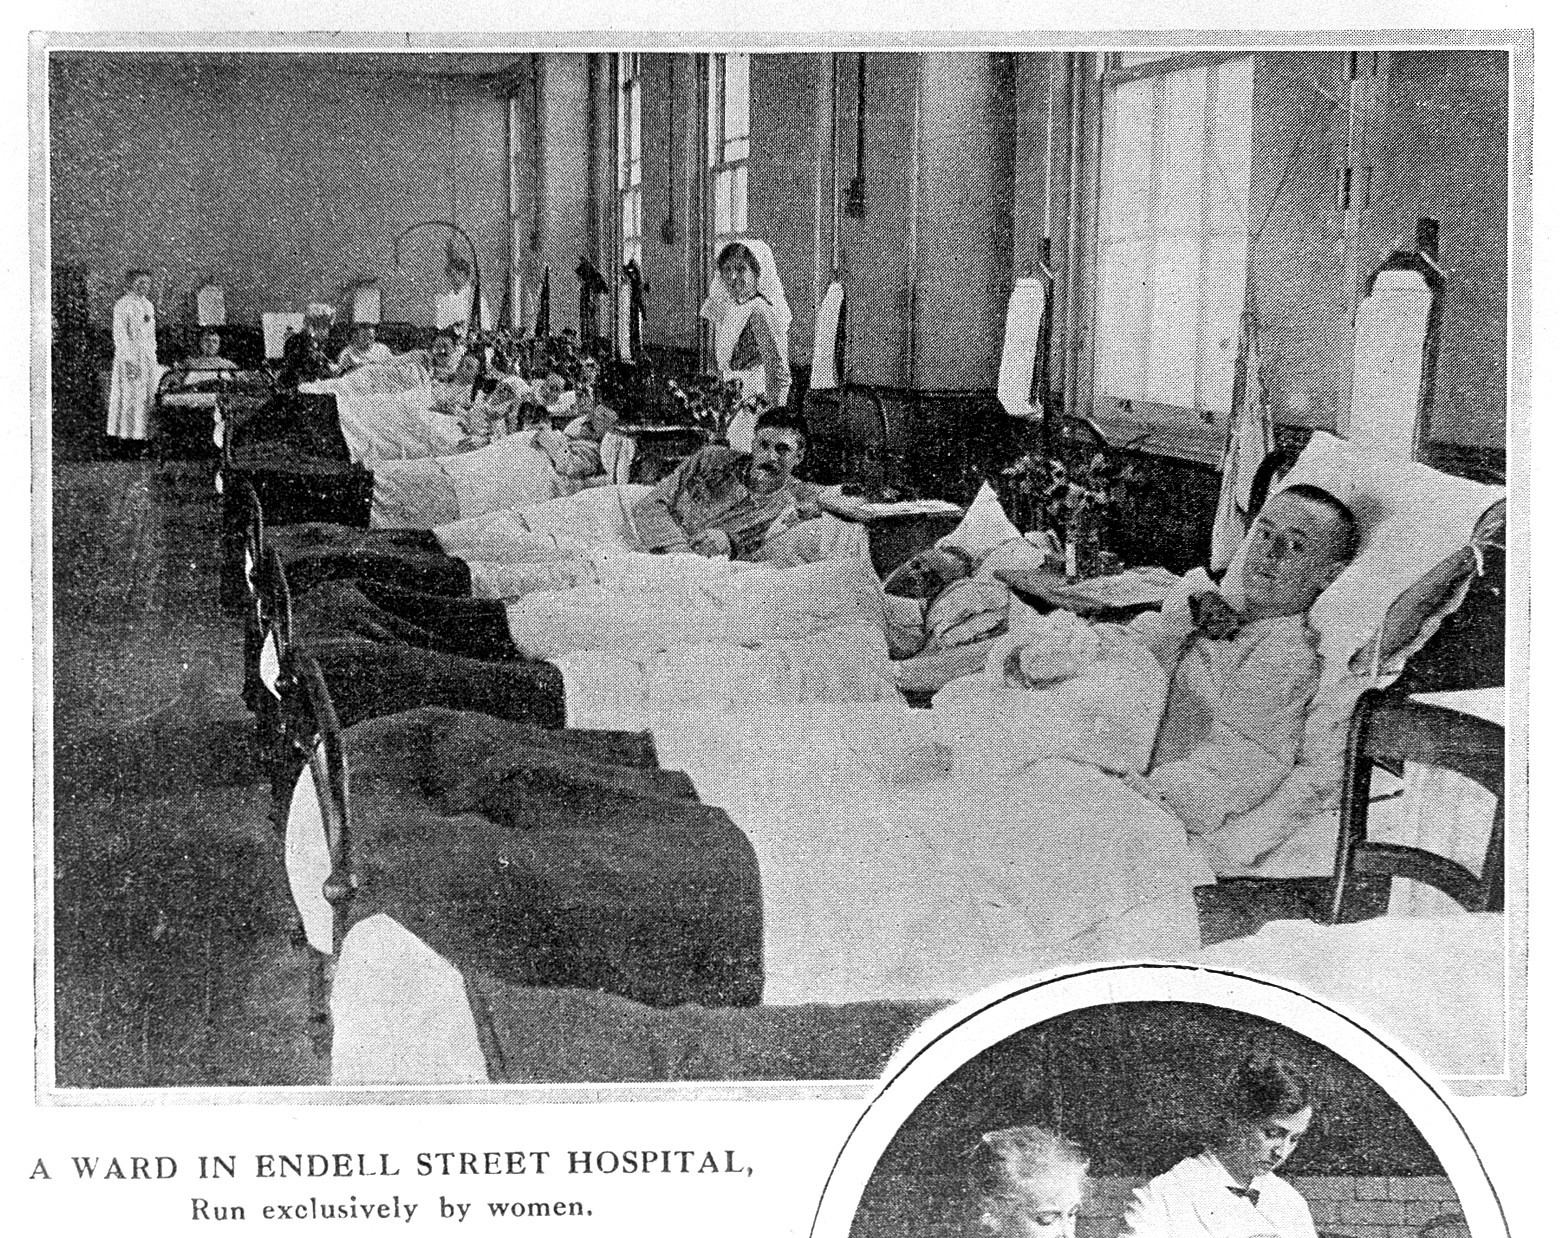 Photograph of a ward in the Endell Street Hospital in London, run exclusively by women. (The Wellcome Collection)